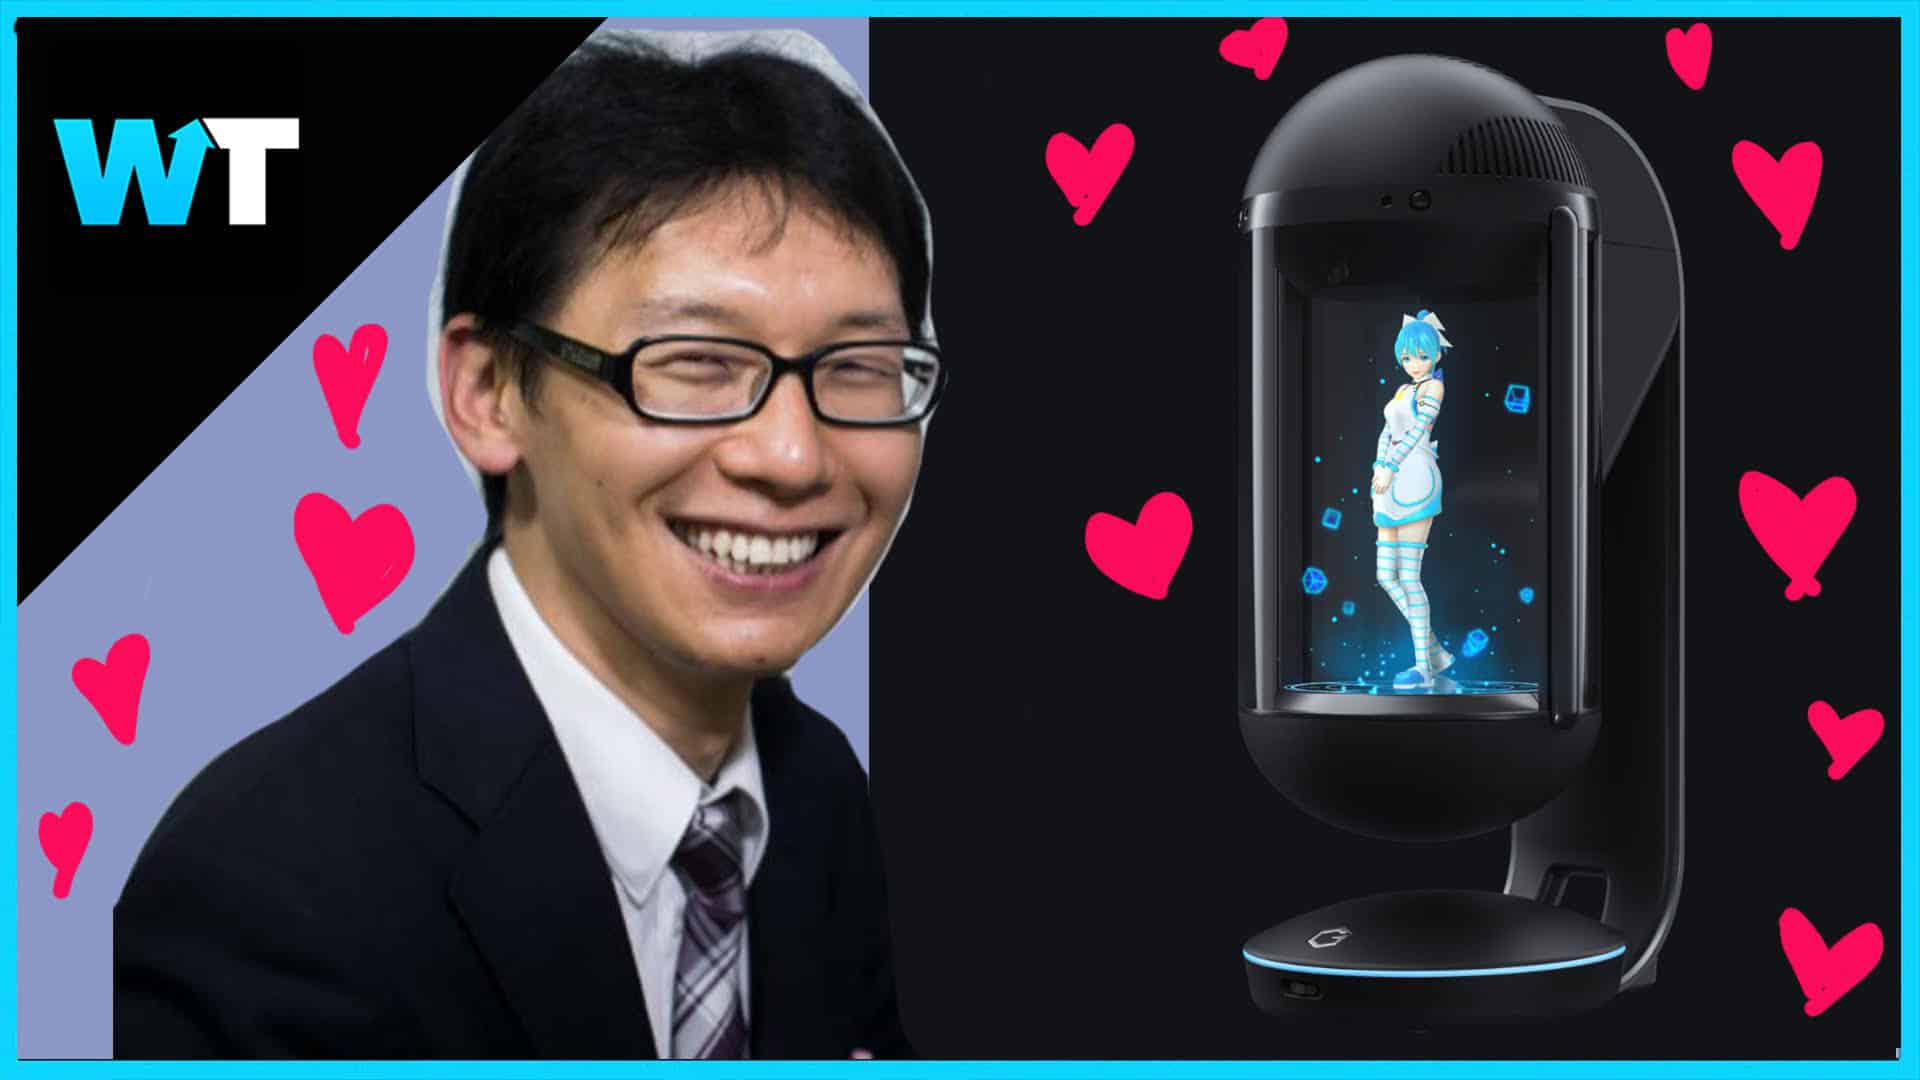 VIDEO: This Man Married a HOLOGRAM?! | What's Trending